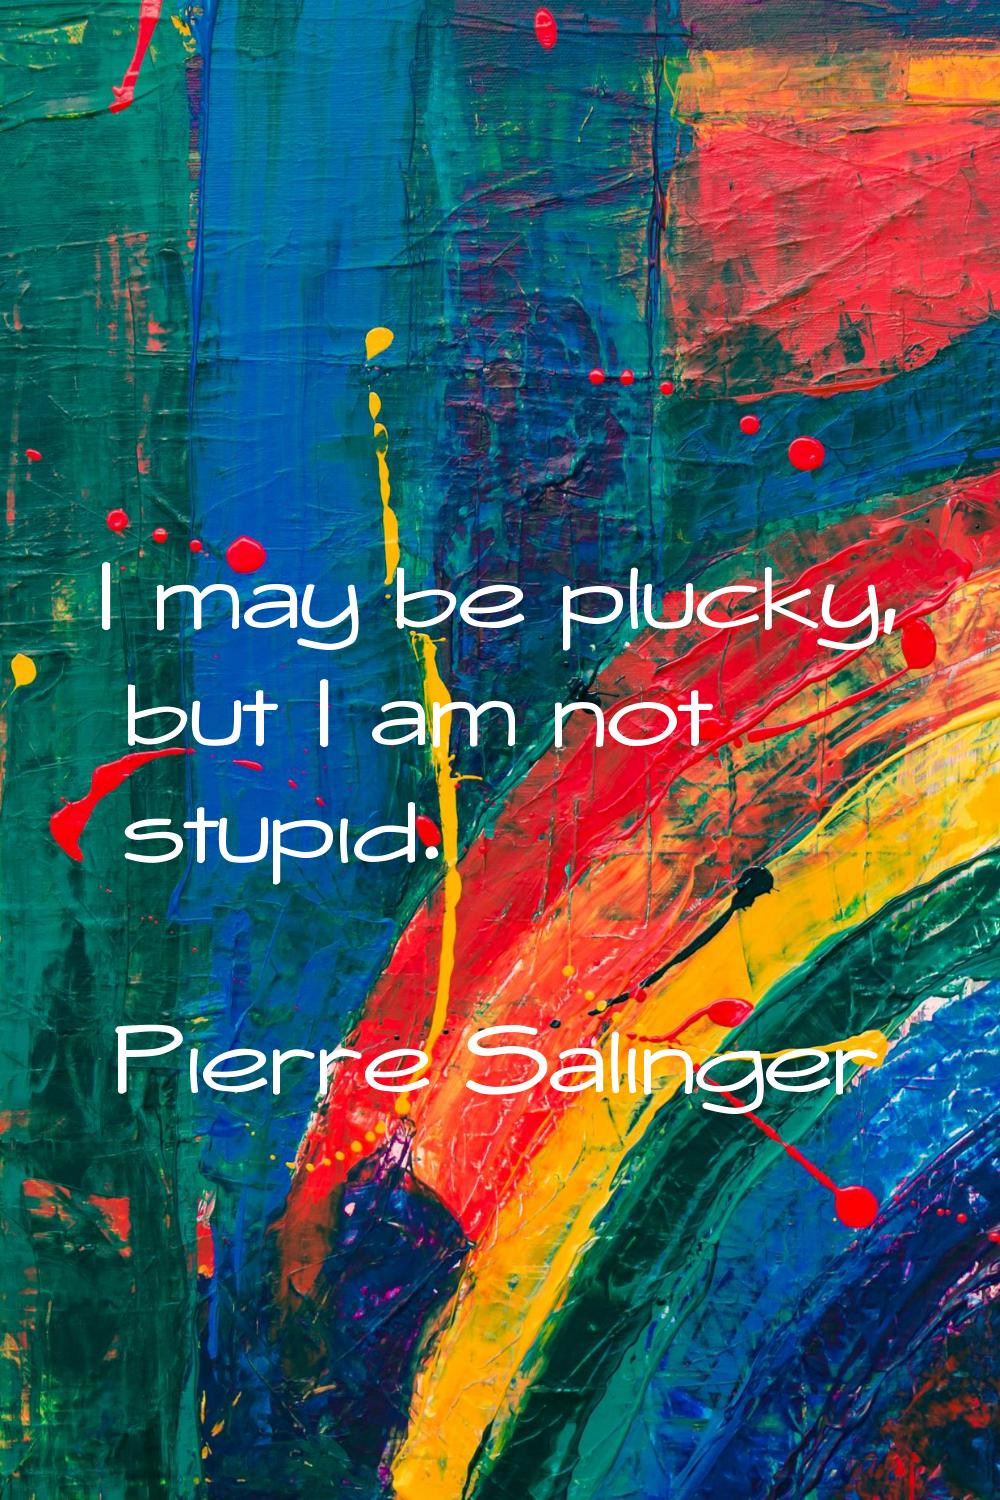 I may be plucky, but I am not stupid.